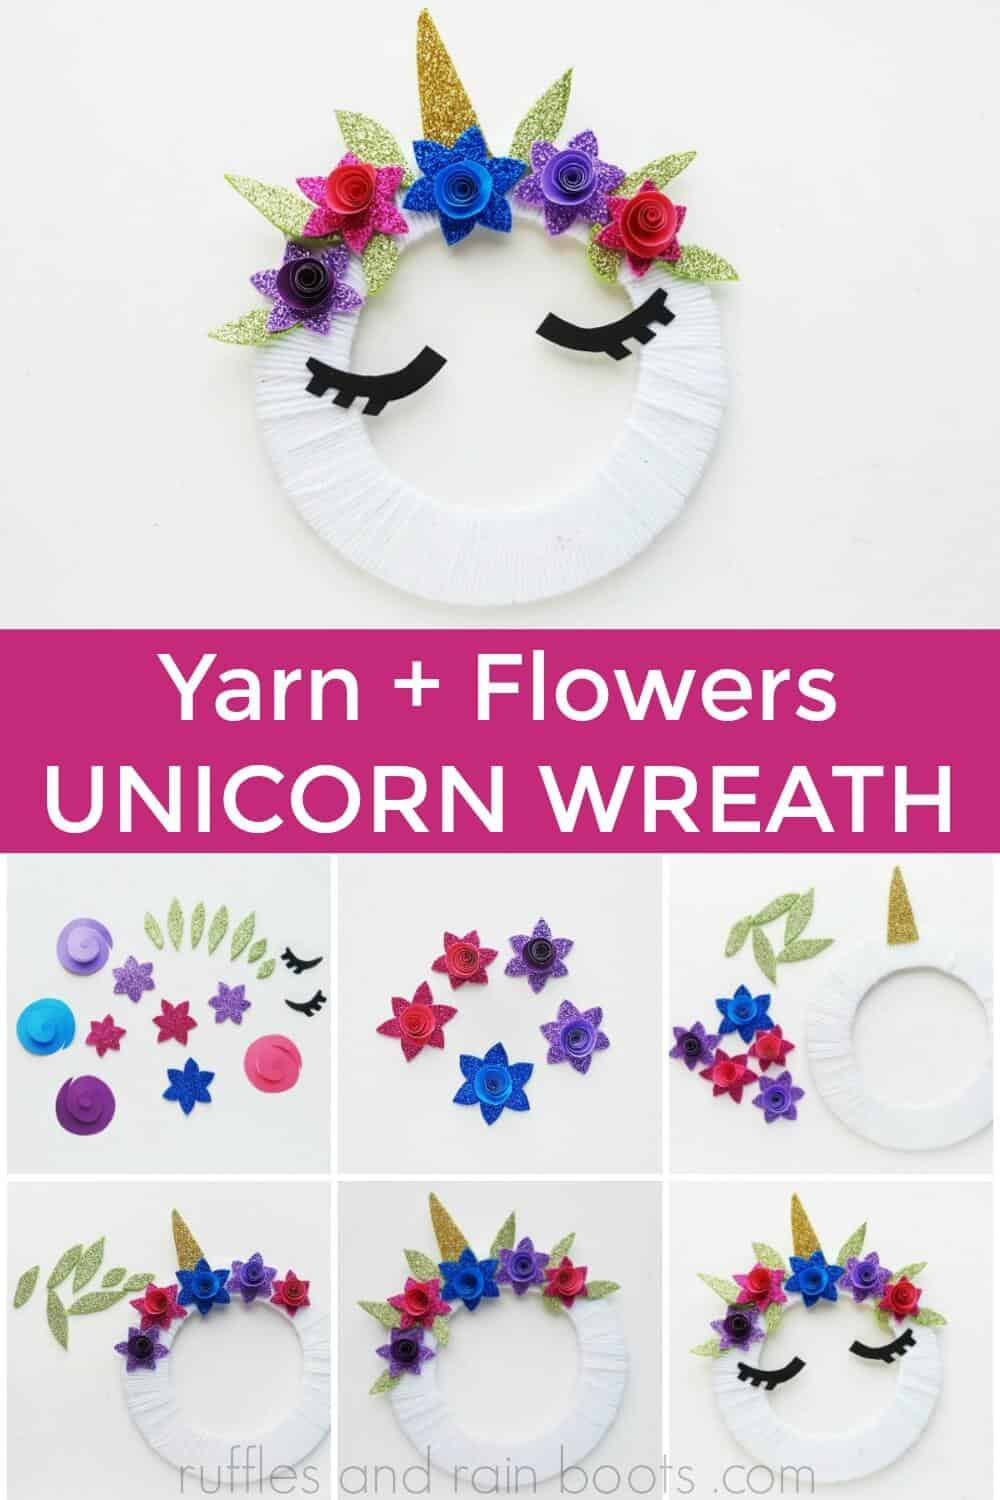 photo collage of how to make a yarn wrapped unicorn wreath and the finished unicorn wreath unicorn craft for kids with text which reads yarn + flowers unicorn wreath